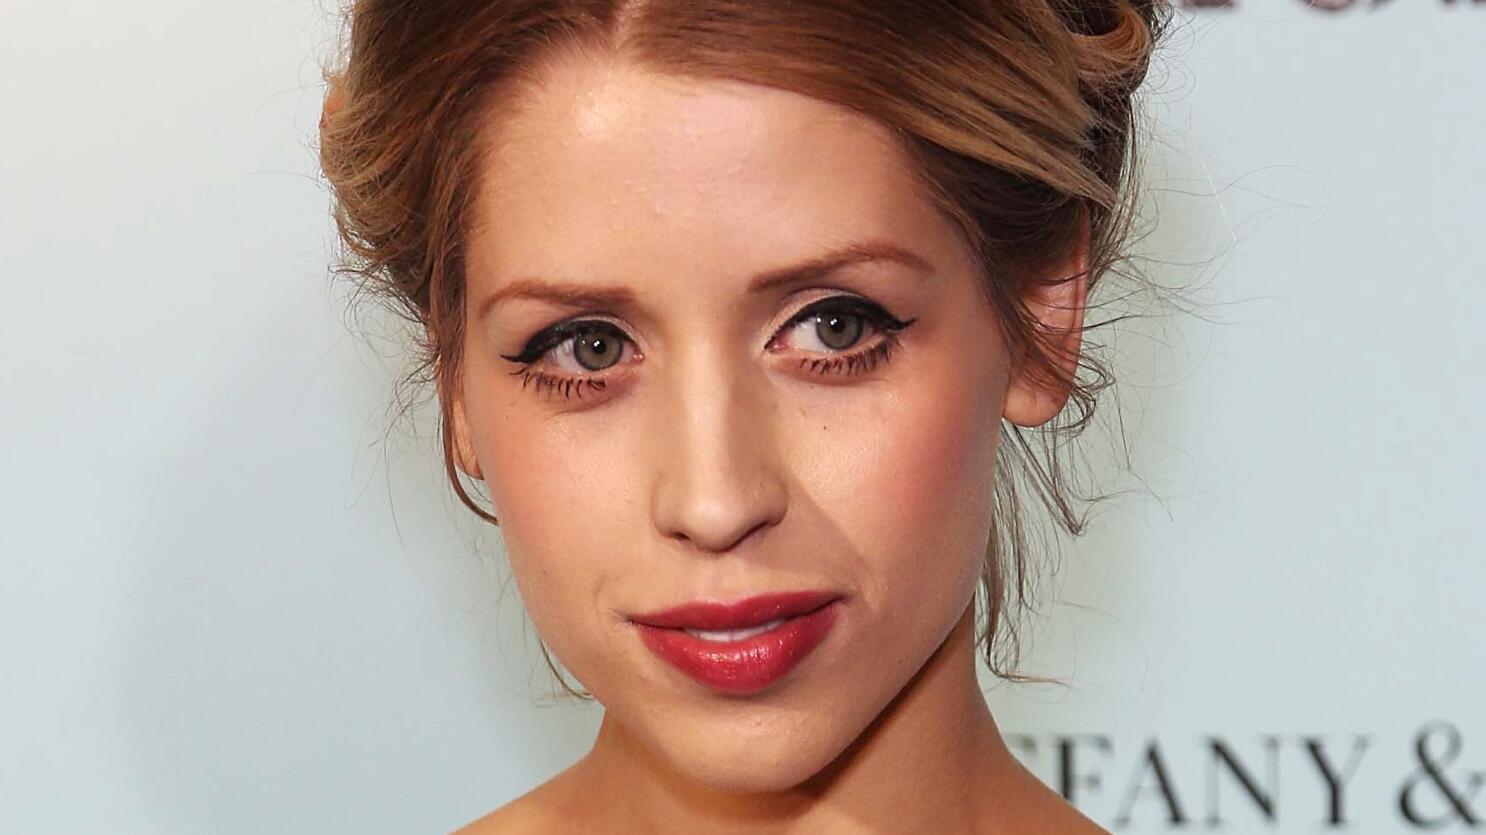 Heroin likely contributed to Peaches Geldof's death